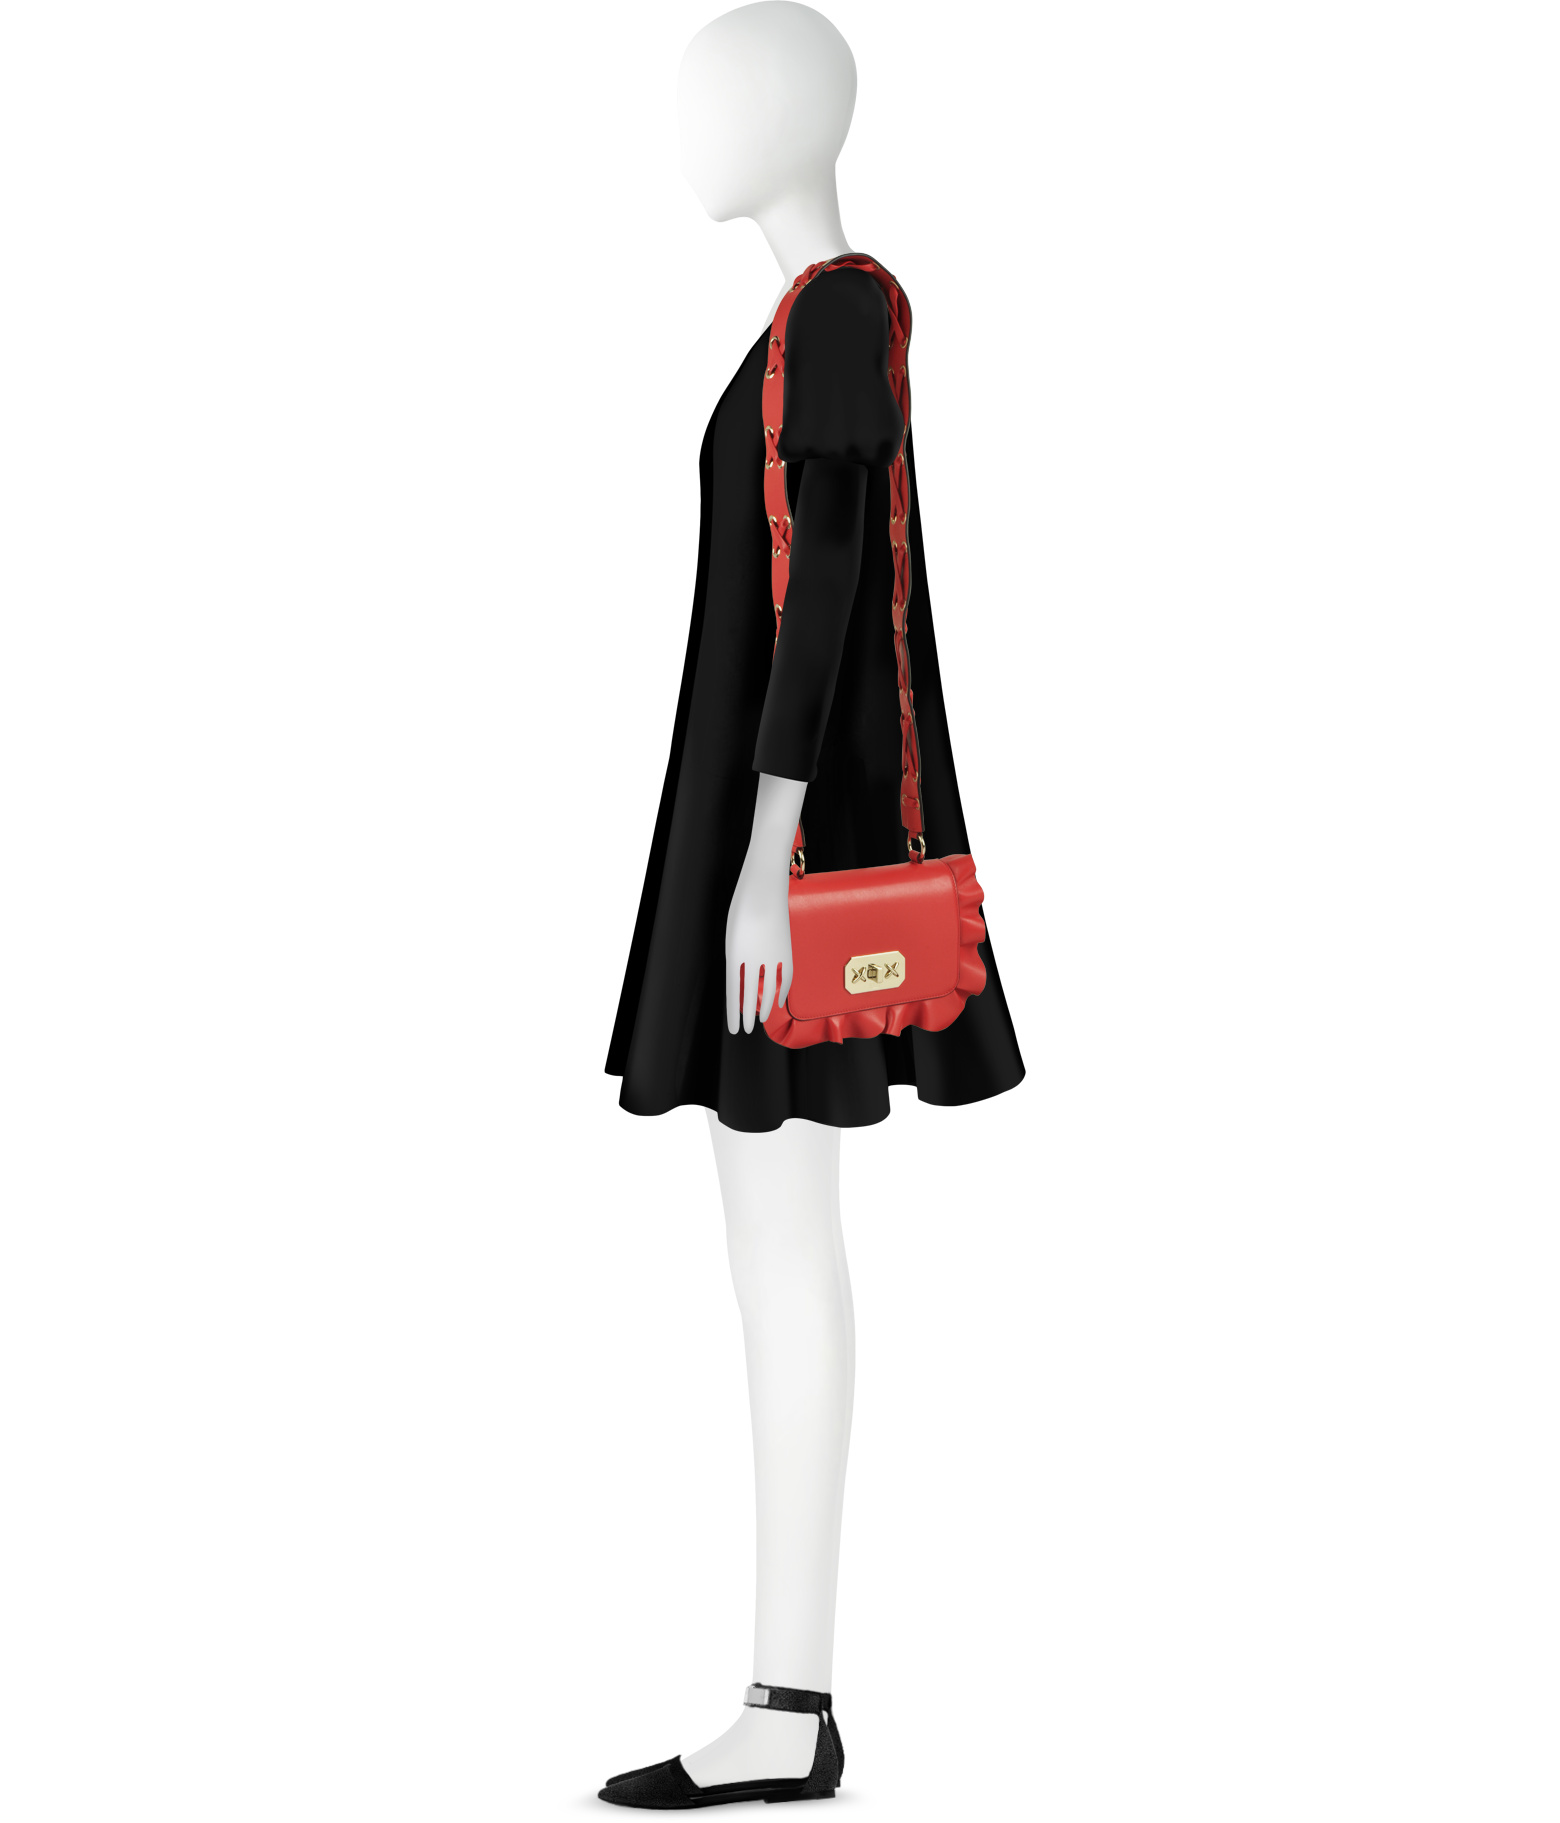 RED Valentino Flame Red Leather Ruffle Small Shoulder Bag at FORZIERI